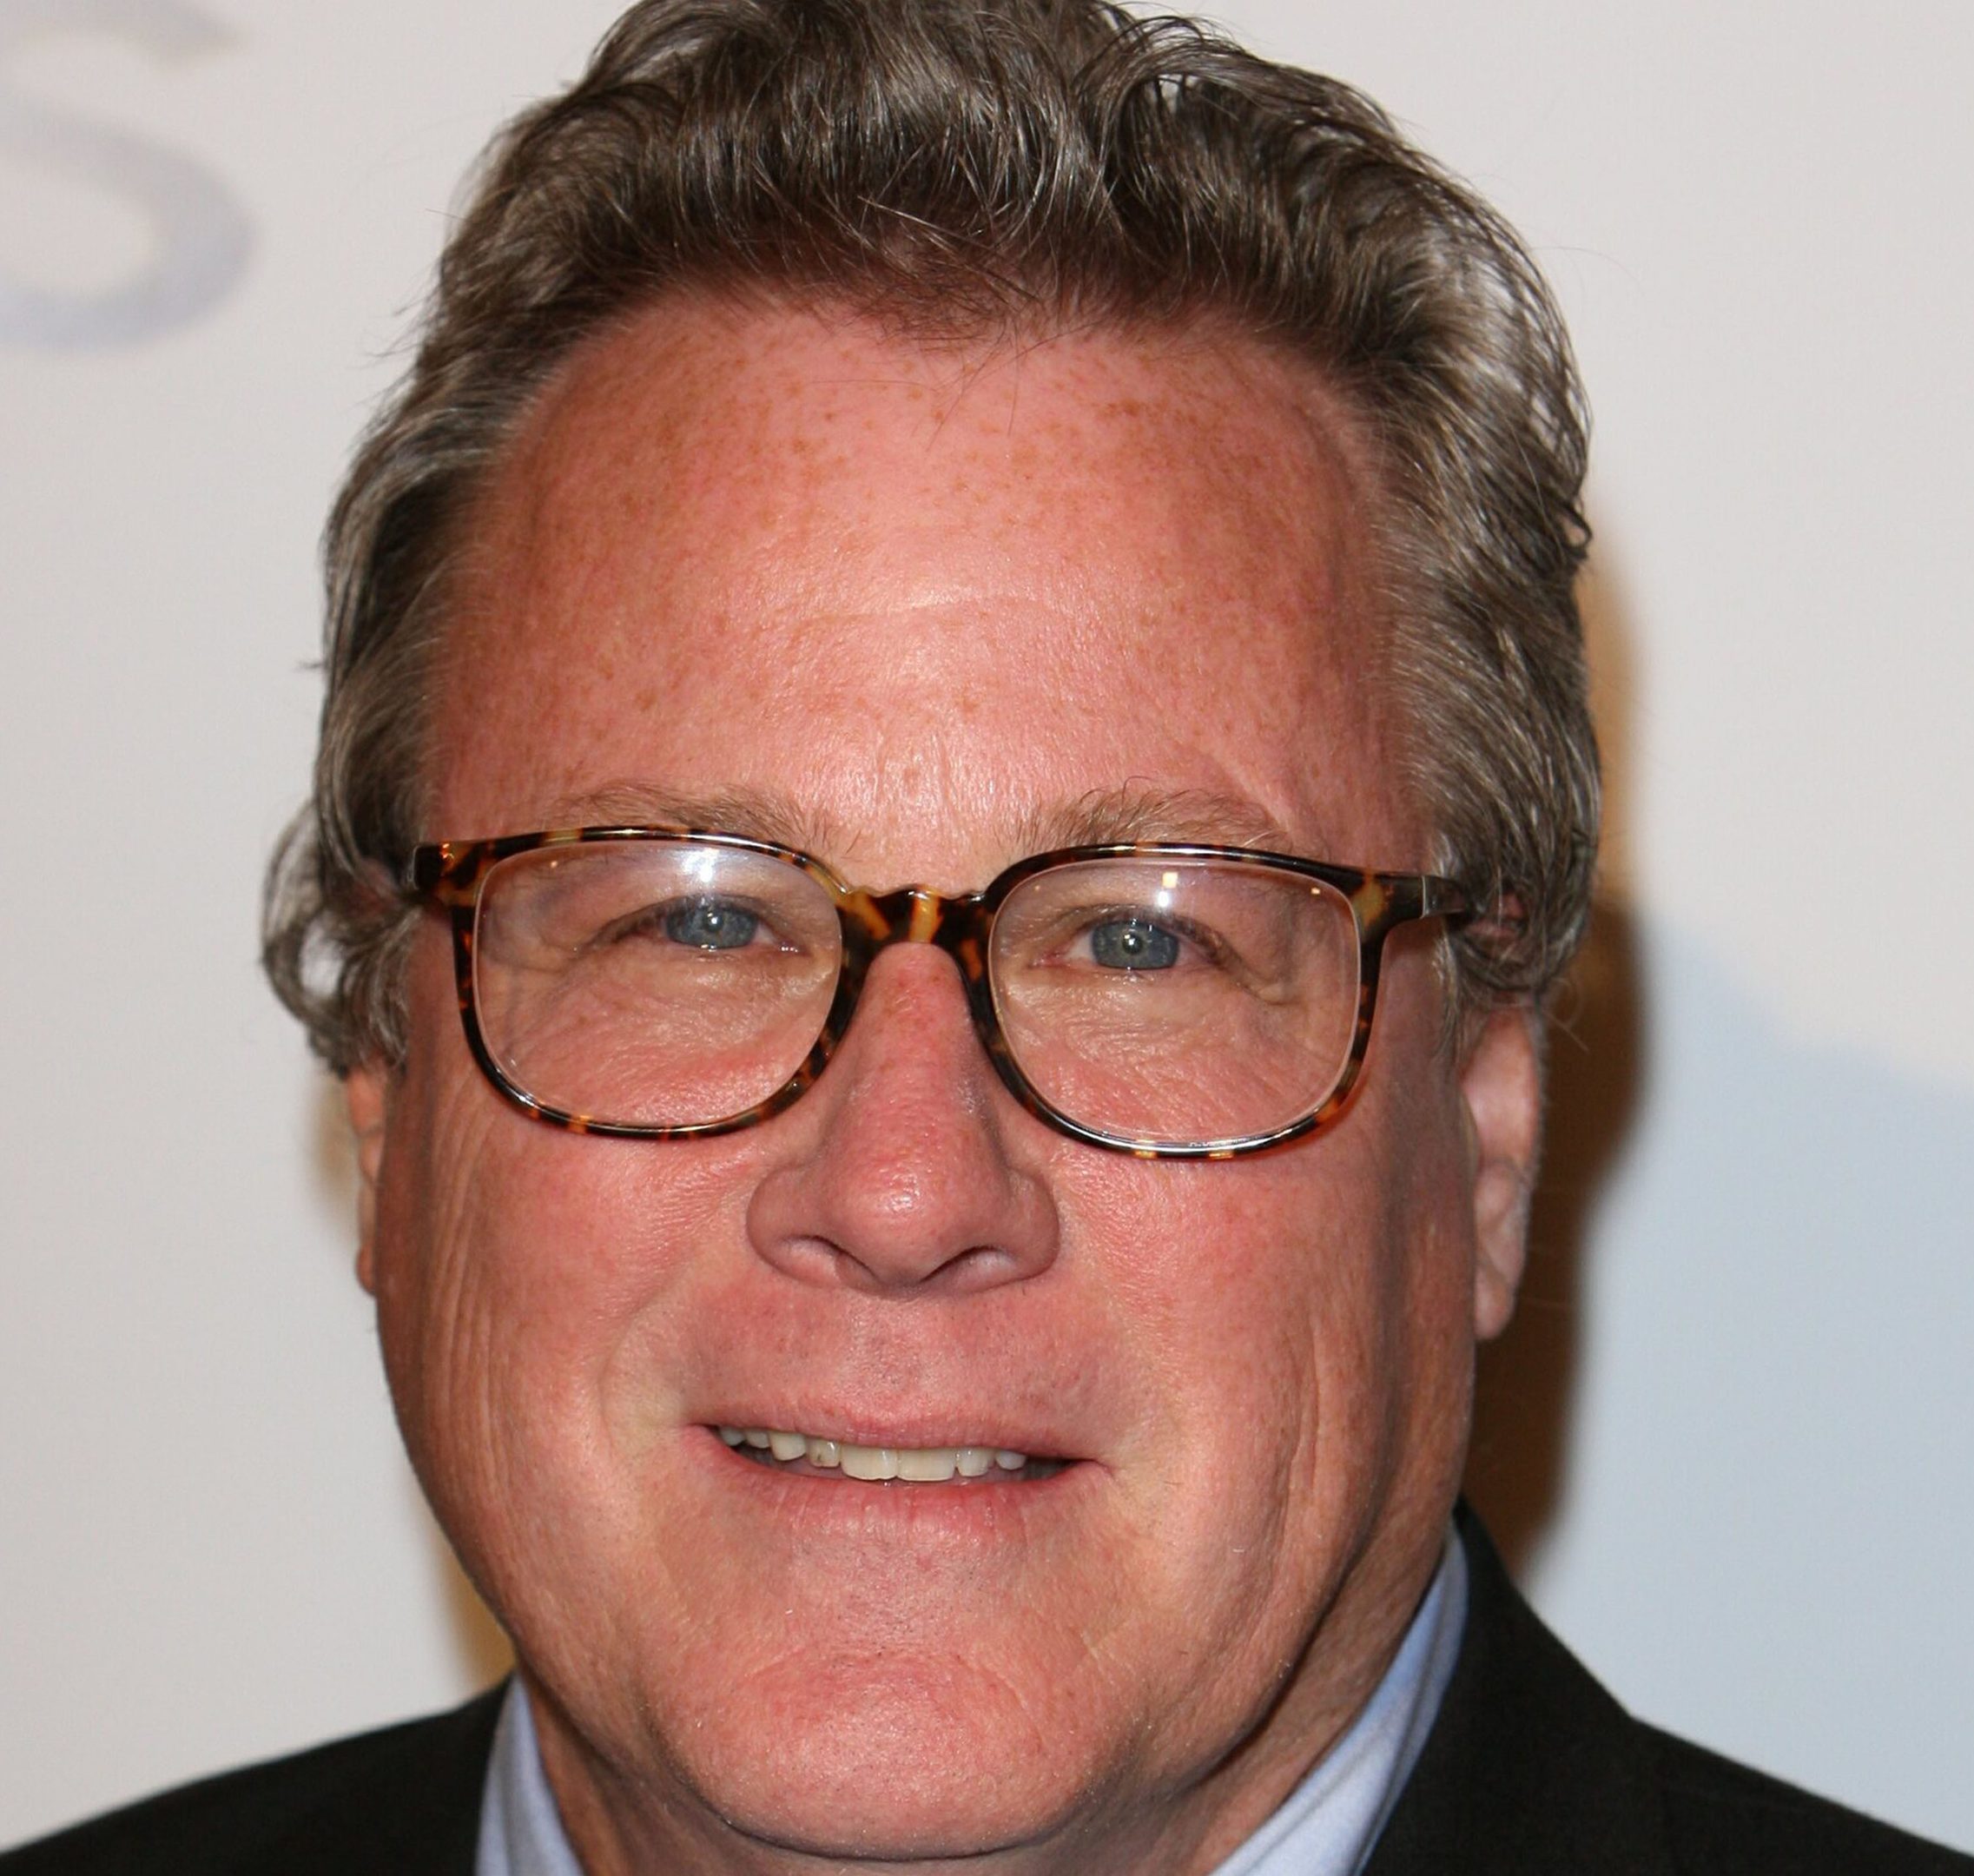 John Heard, known for his starring role in Home Alone, who has died at the age of 72. (Ian West/PA Wire)